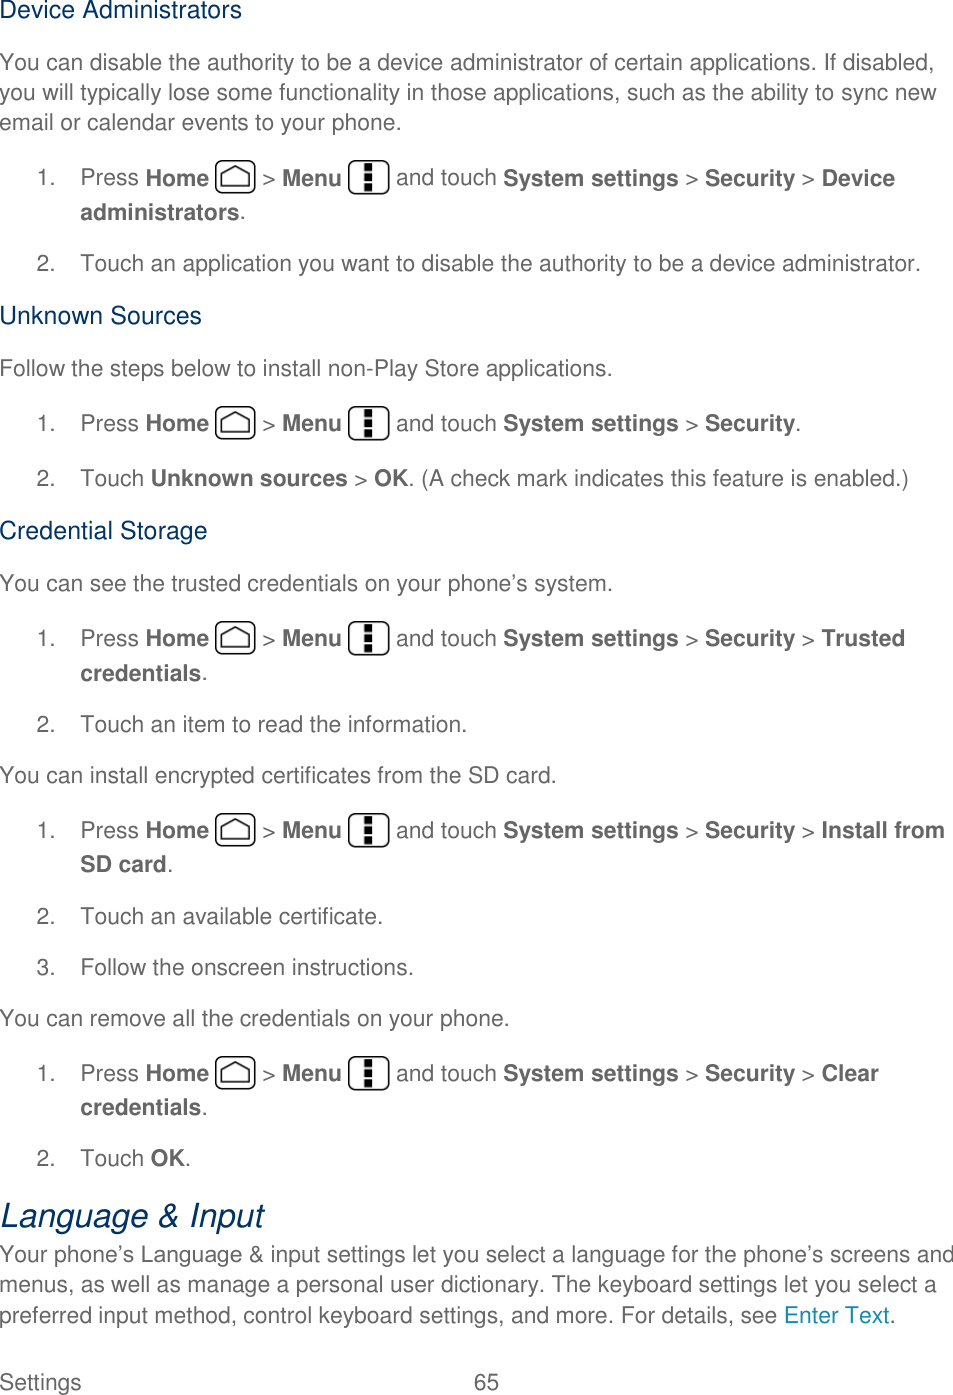  Settings  65   Device Administrators You can disable the authority to be a device administrator of certain applications. If disabled, you will typically lose some functionality in those applications, such as the ability to sync new email or calendar events to your phone. 1.  Press Home   &gt; Menu   and touch System settings &gt; Security &gt; Device administrators. 2.  Touch an application you want to disable the authority to be a device administrator. Unknown Sources Follow the steps below to install non-Play Store applications. 1.  Press Home   &gt; Menu   and touch System settings &gt; Security. 2.  Touch Unknown sources &gt; OK. (A check mark indicates this feature is enabled.) Credential Storage You can see the trusted credentials on your phone’s system. 1.  Press Home   &gt; Menu   and touch System settings &gt; Security &gt; Trusted credentials. 2.  Touch an item to read the information. You can install encrypted certificates from the SD card. 1.  Press Home   &gt; Menu   and touch System settings &gt; Security &gt; Install from SD card. 2.  Touch an available certificate. 3.  Follow the onscreen instructions. You can remove all the credentials on your phone. 1.  Press Home   &gt; Menu   and touch System settings &gt; Security &gt; Clear credentials. 2.  Touch OK. Language &amp; Input Your phone’s Language &amp; input settings let you select a language for the phone’s screens and menus, as well as manage a personal user dictionary. The keyboard settings let you select a preferred input method, control keyboard settings, and more. For details, see Enter Text. 